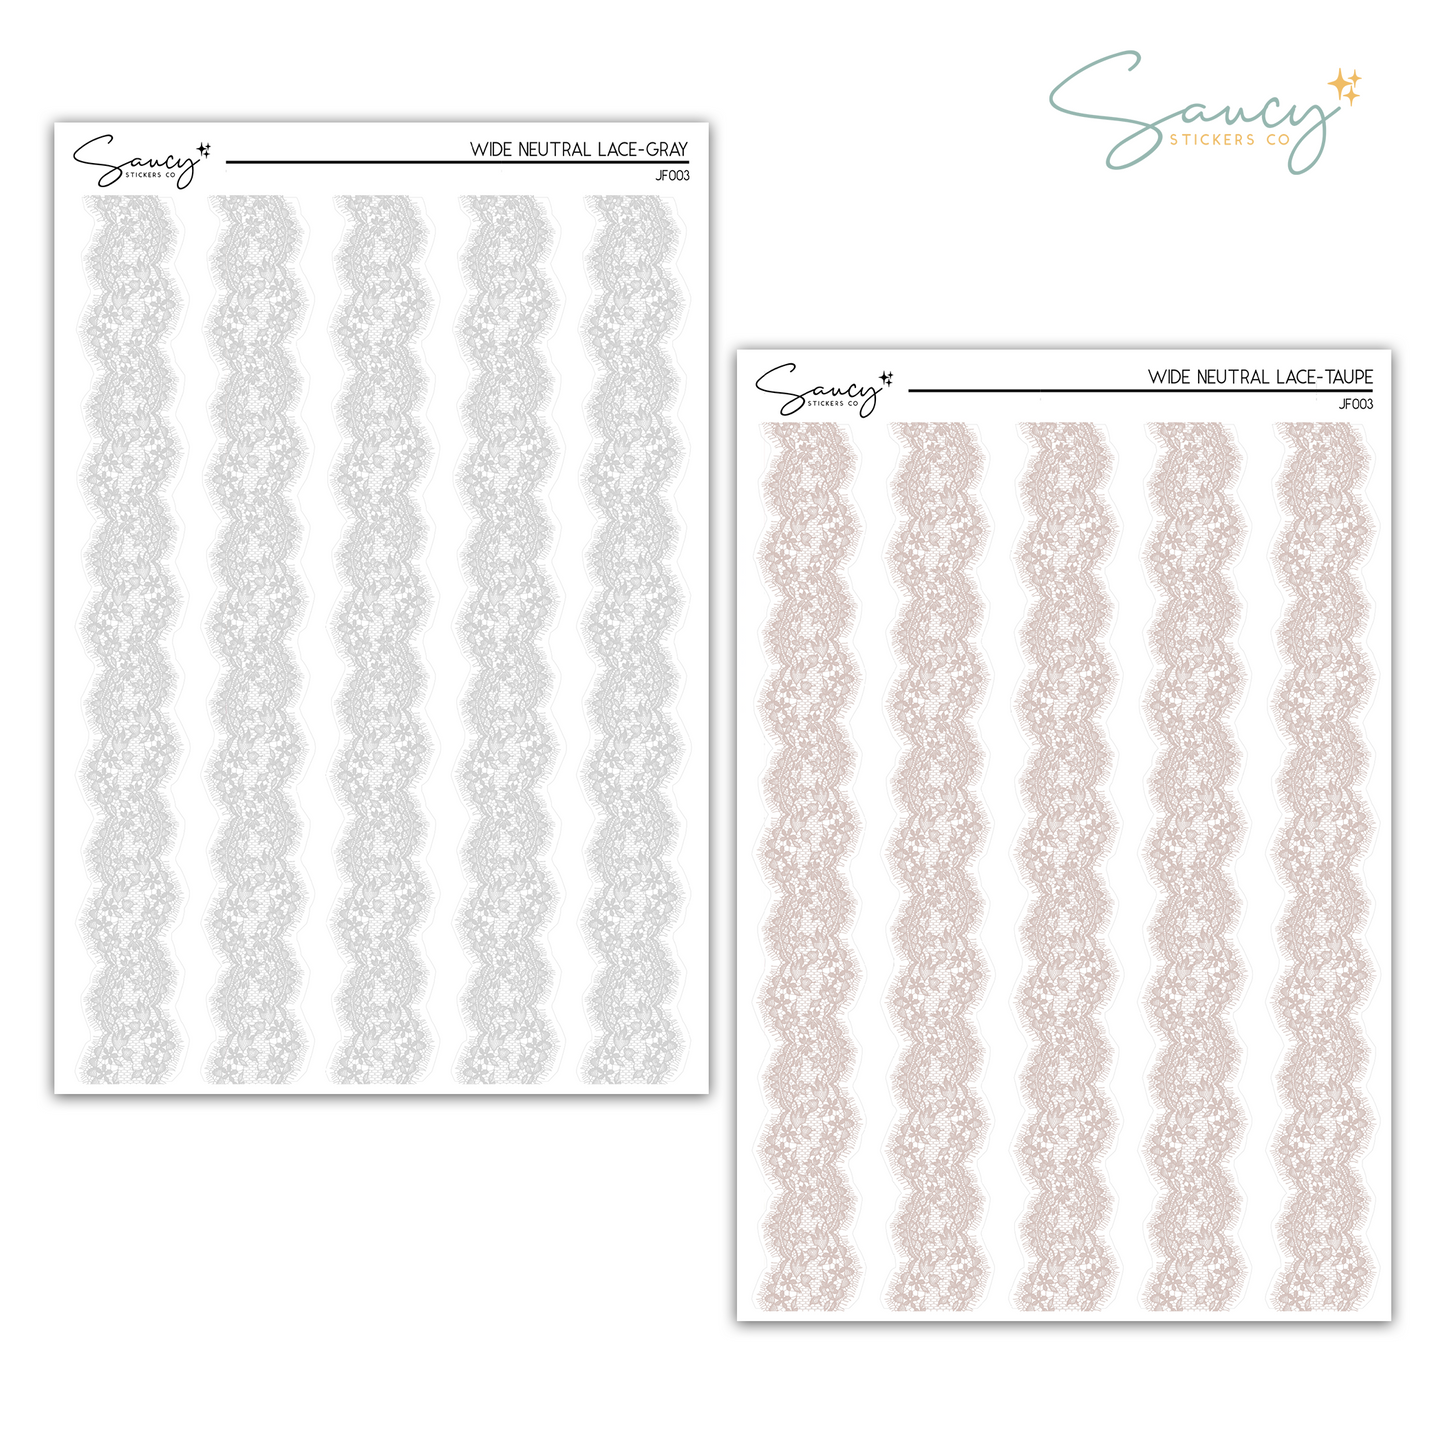 Wide Neutral Lace | Journaling Stickers